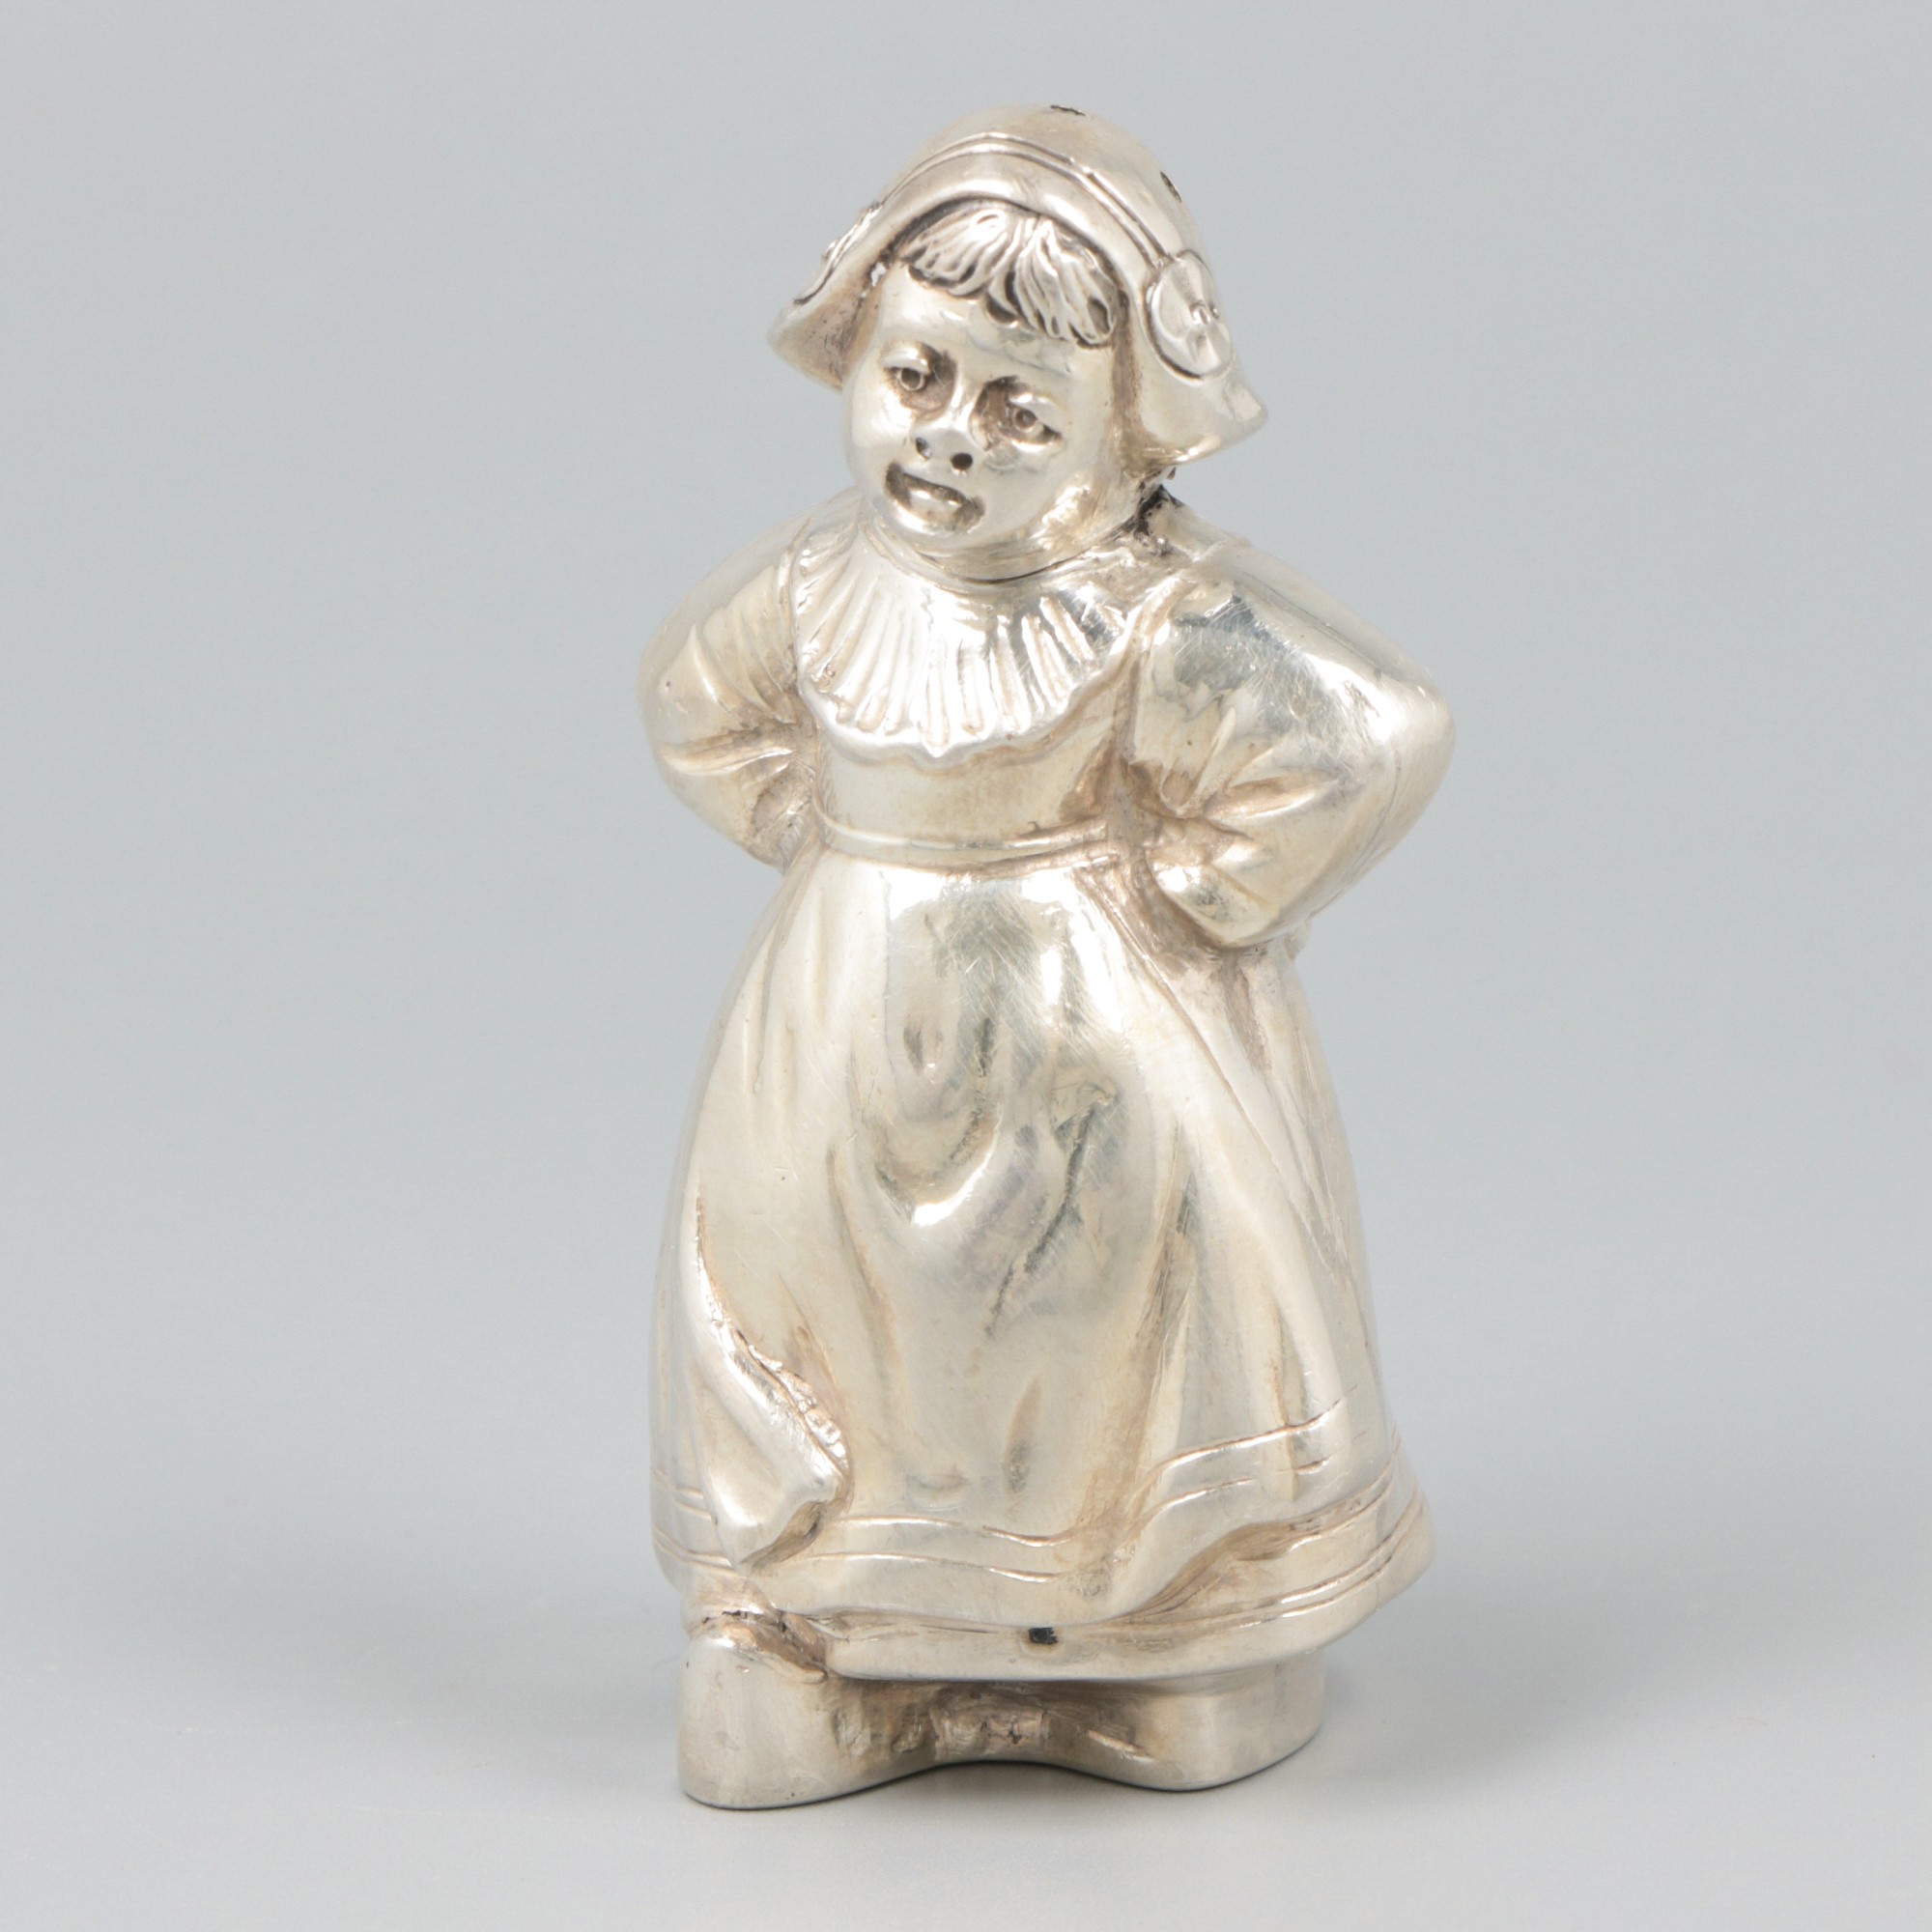 Caster "Dutch girl in traditional costume" silver.